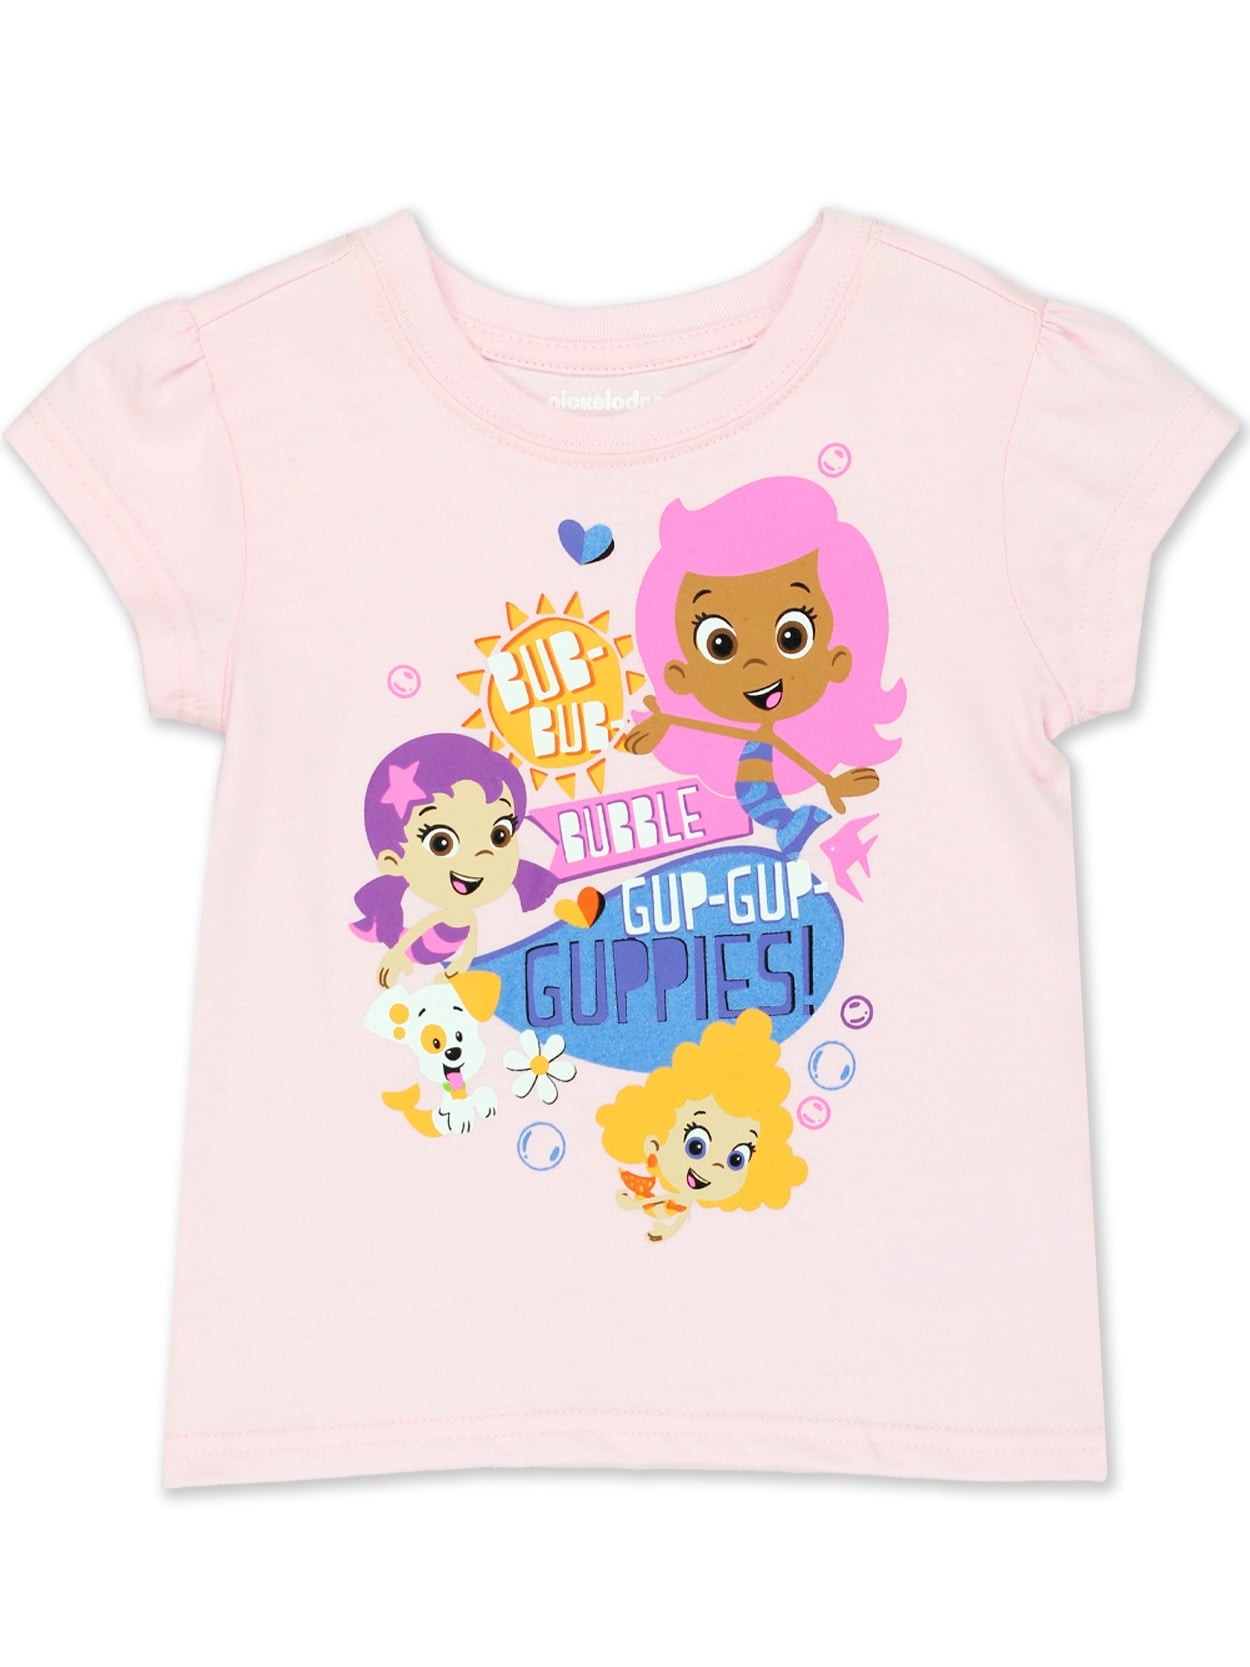 Bubble Guppies Toddler Boy Long Sleeve Shirt Top Gil Bubble Puppy New 5T